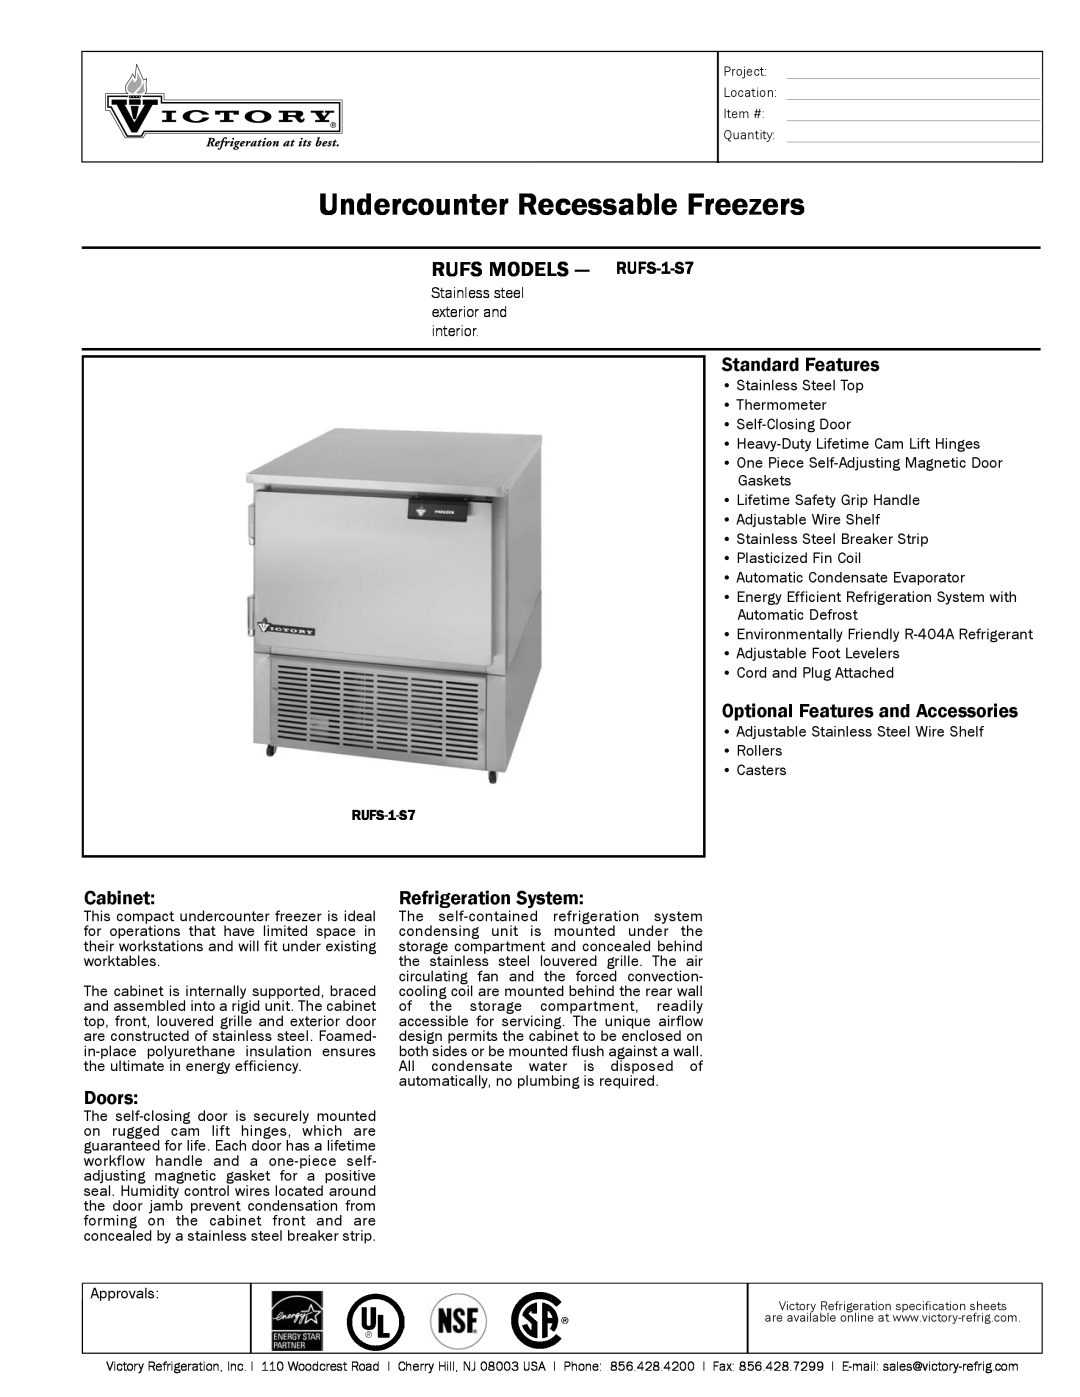 Victory Refrigeration specifications Undercounter Recessable Freezers, RUFS MODELS — RUFS-1-S7, Standard Features 